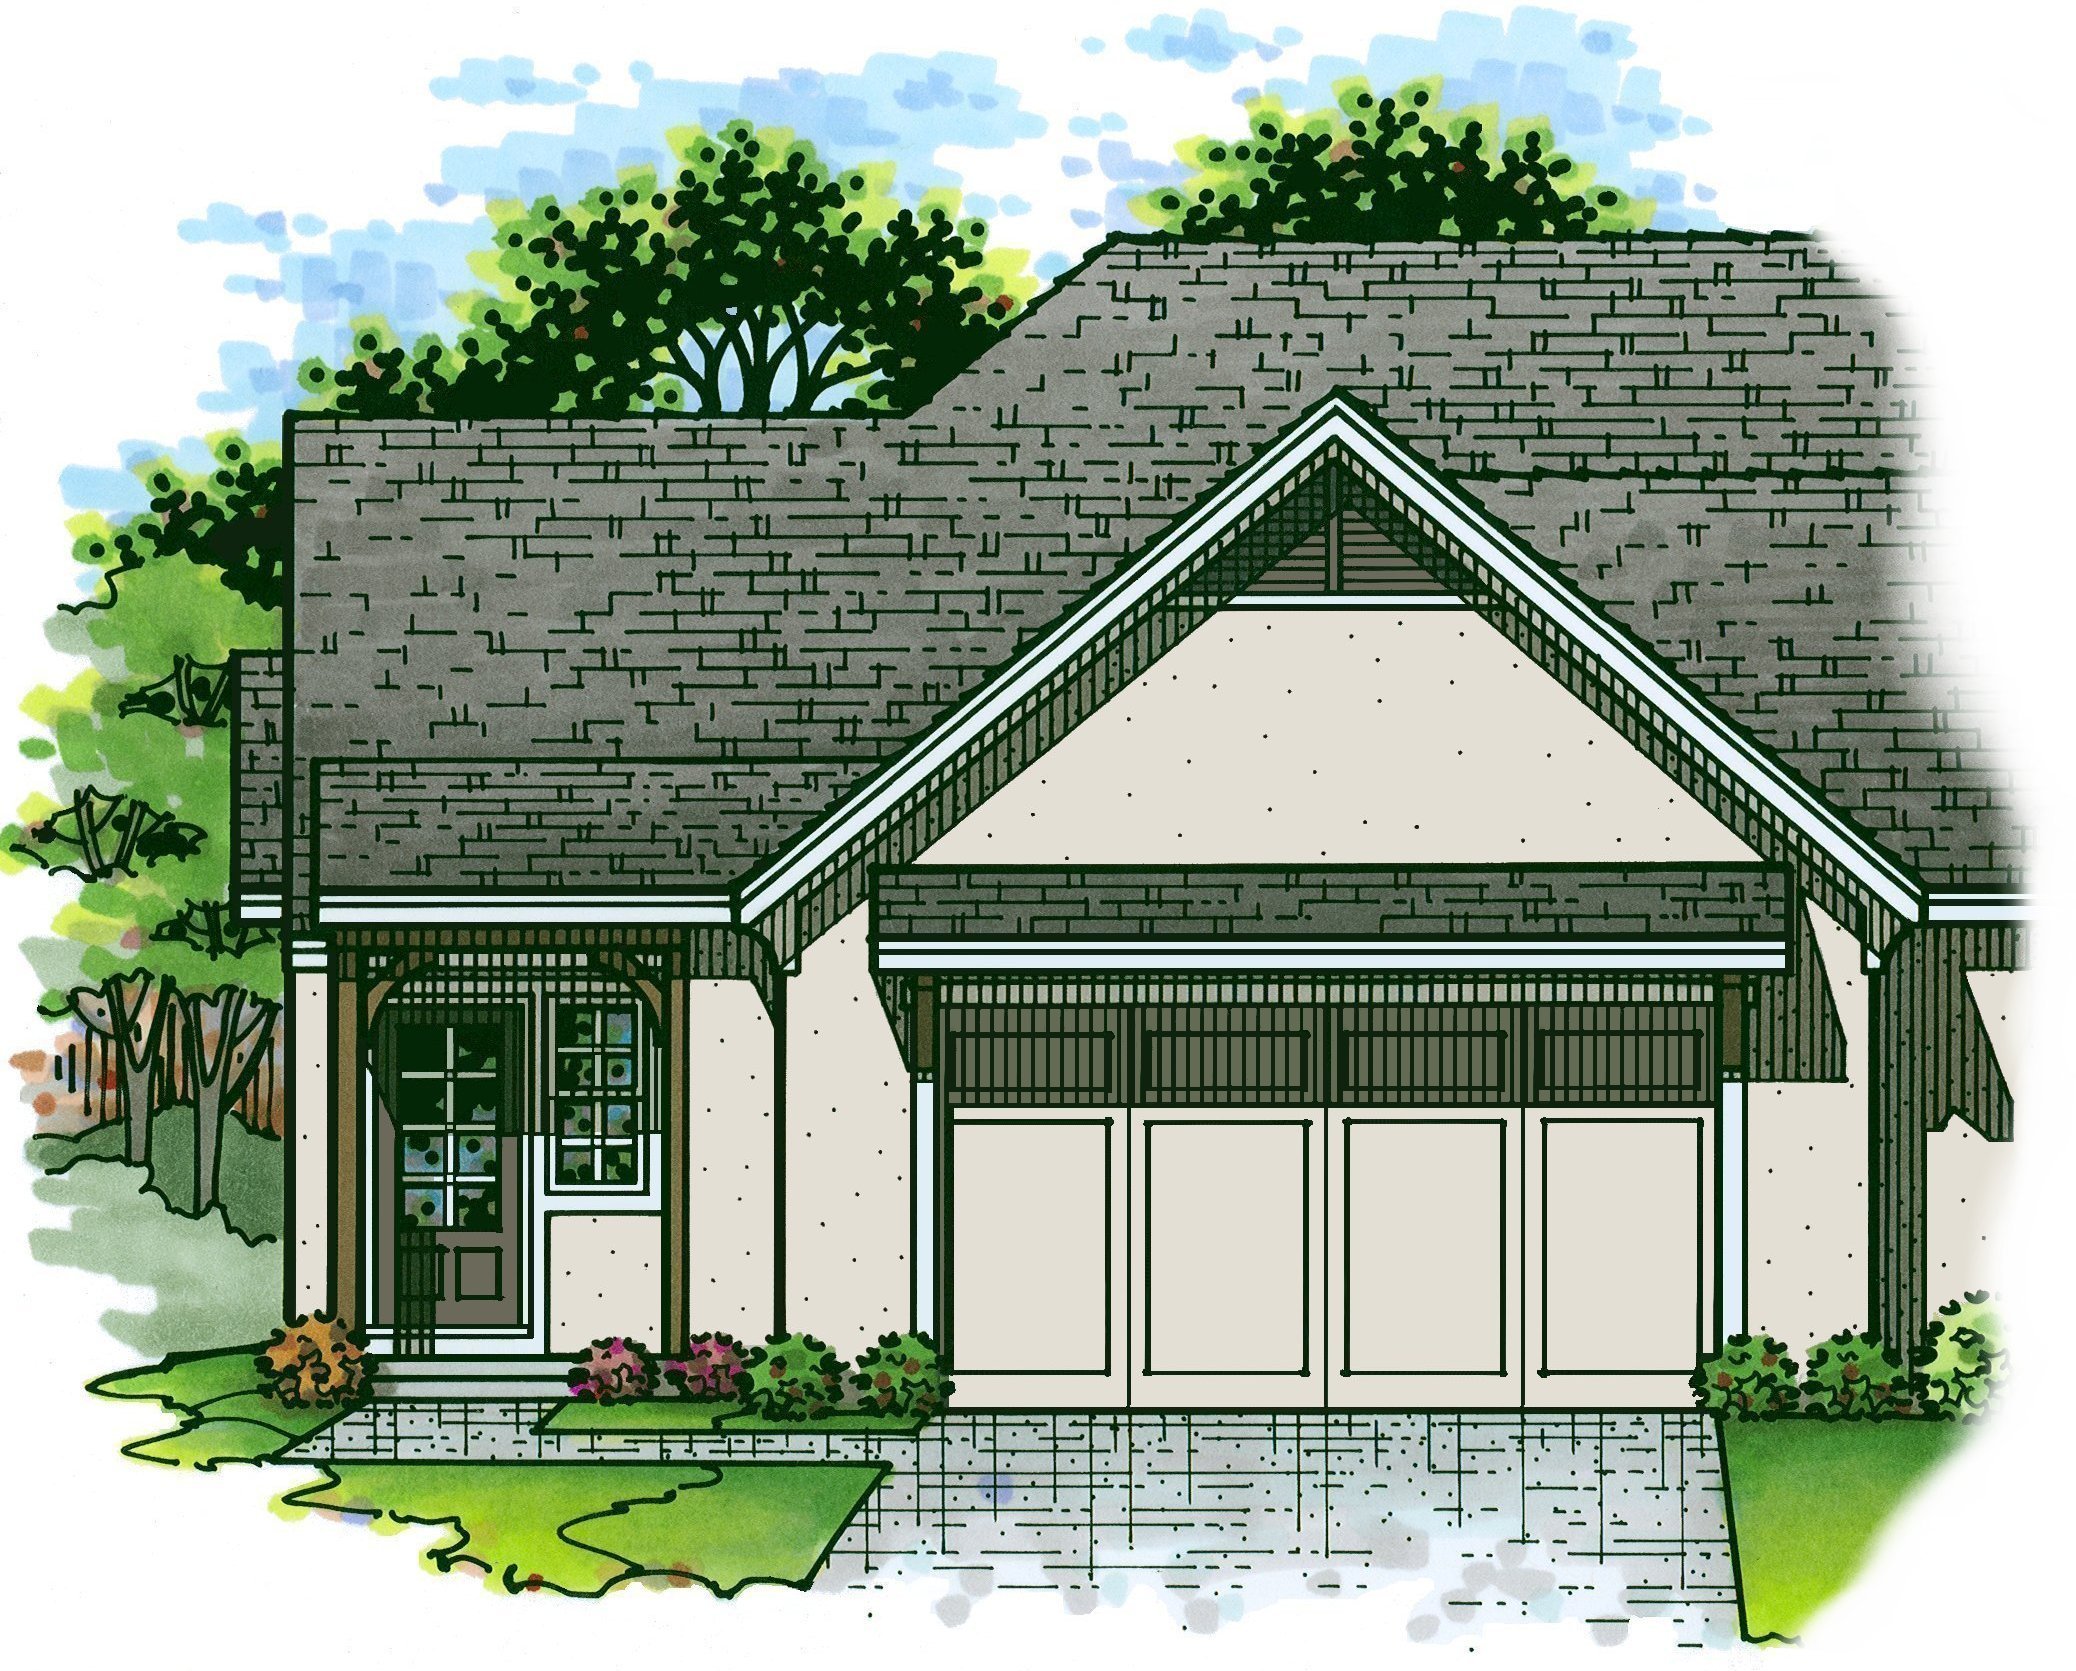 Rendering of the front elevation of 21917 W 82nd Ter from Lambie Homes